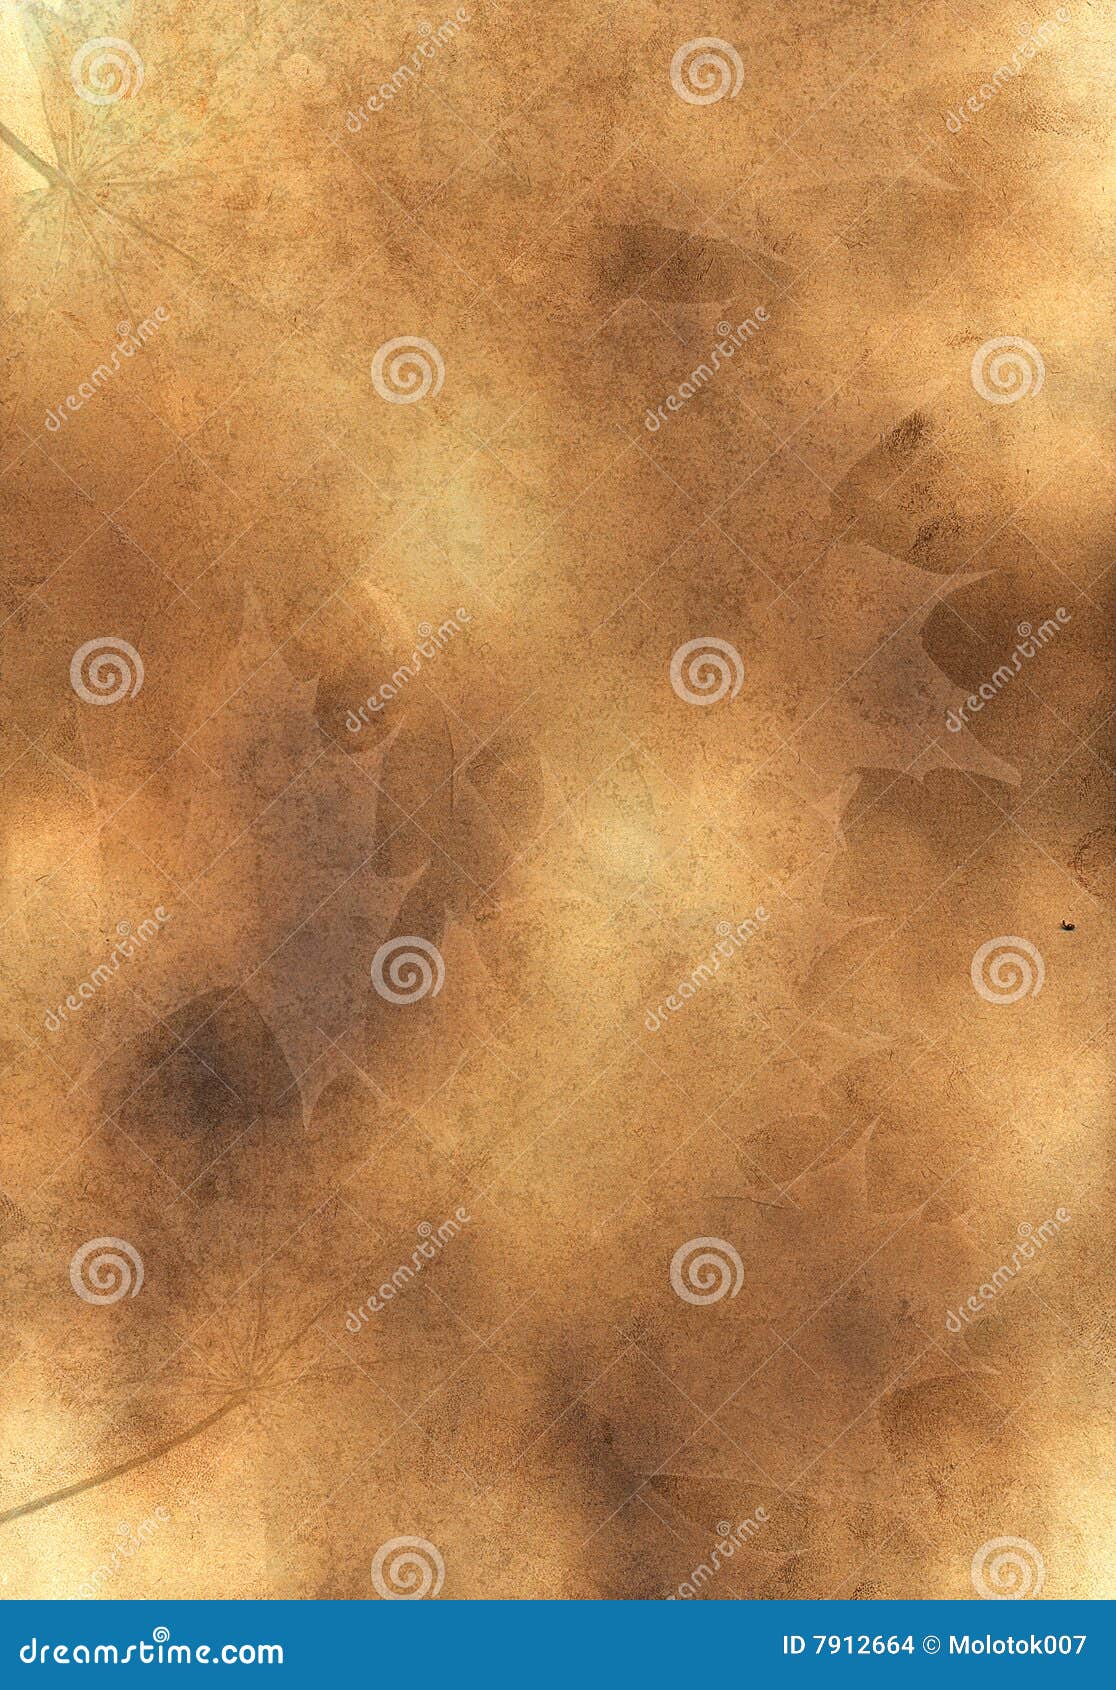 13384 Old Paper Autumn Background Stock Photos